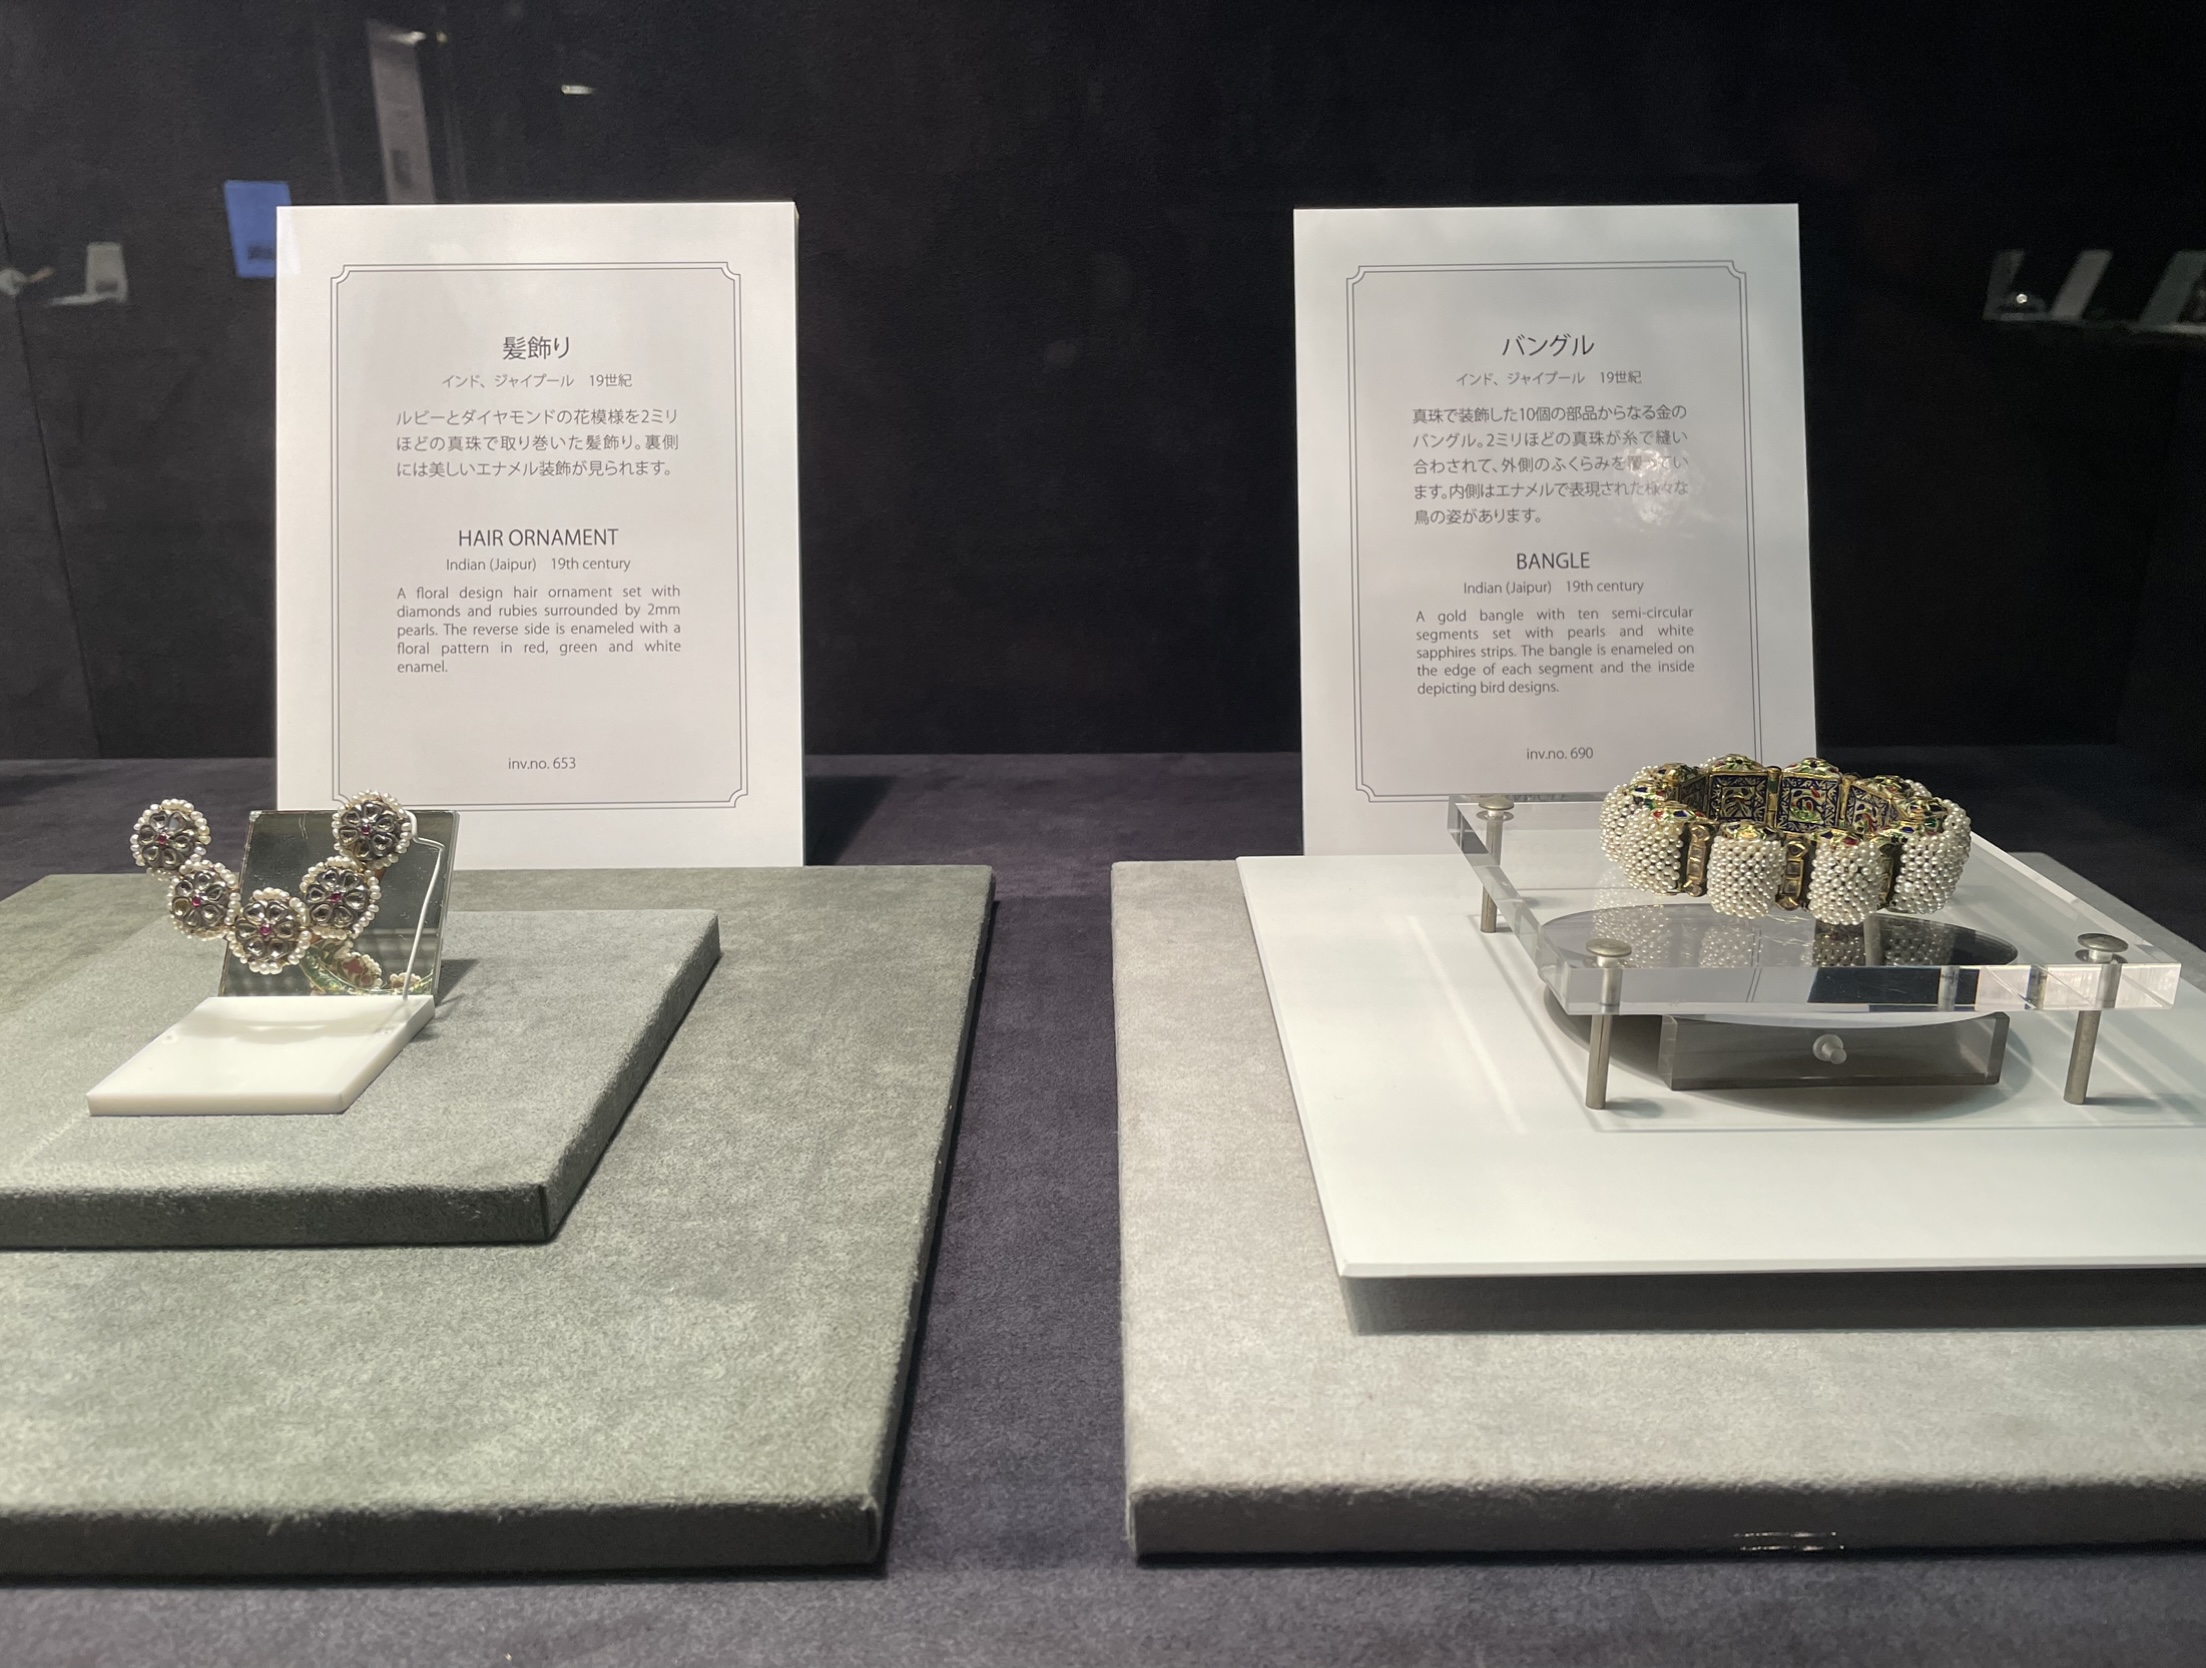 Hair ornament and bangle - Mikimoto Pearl Museum